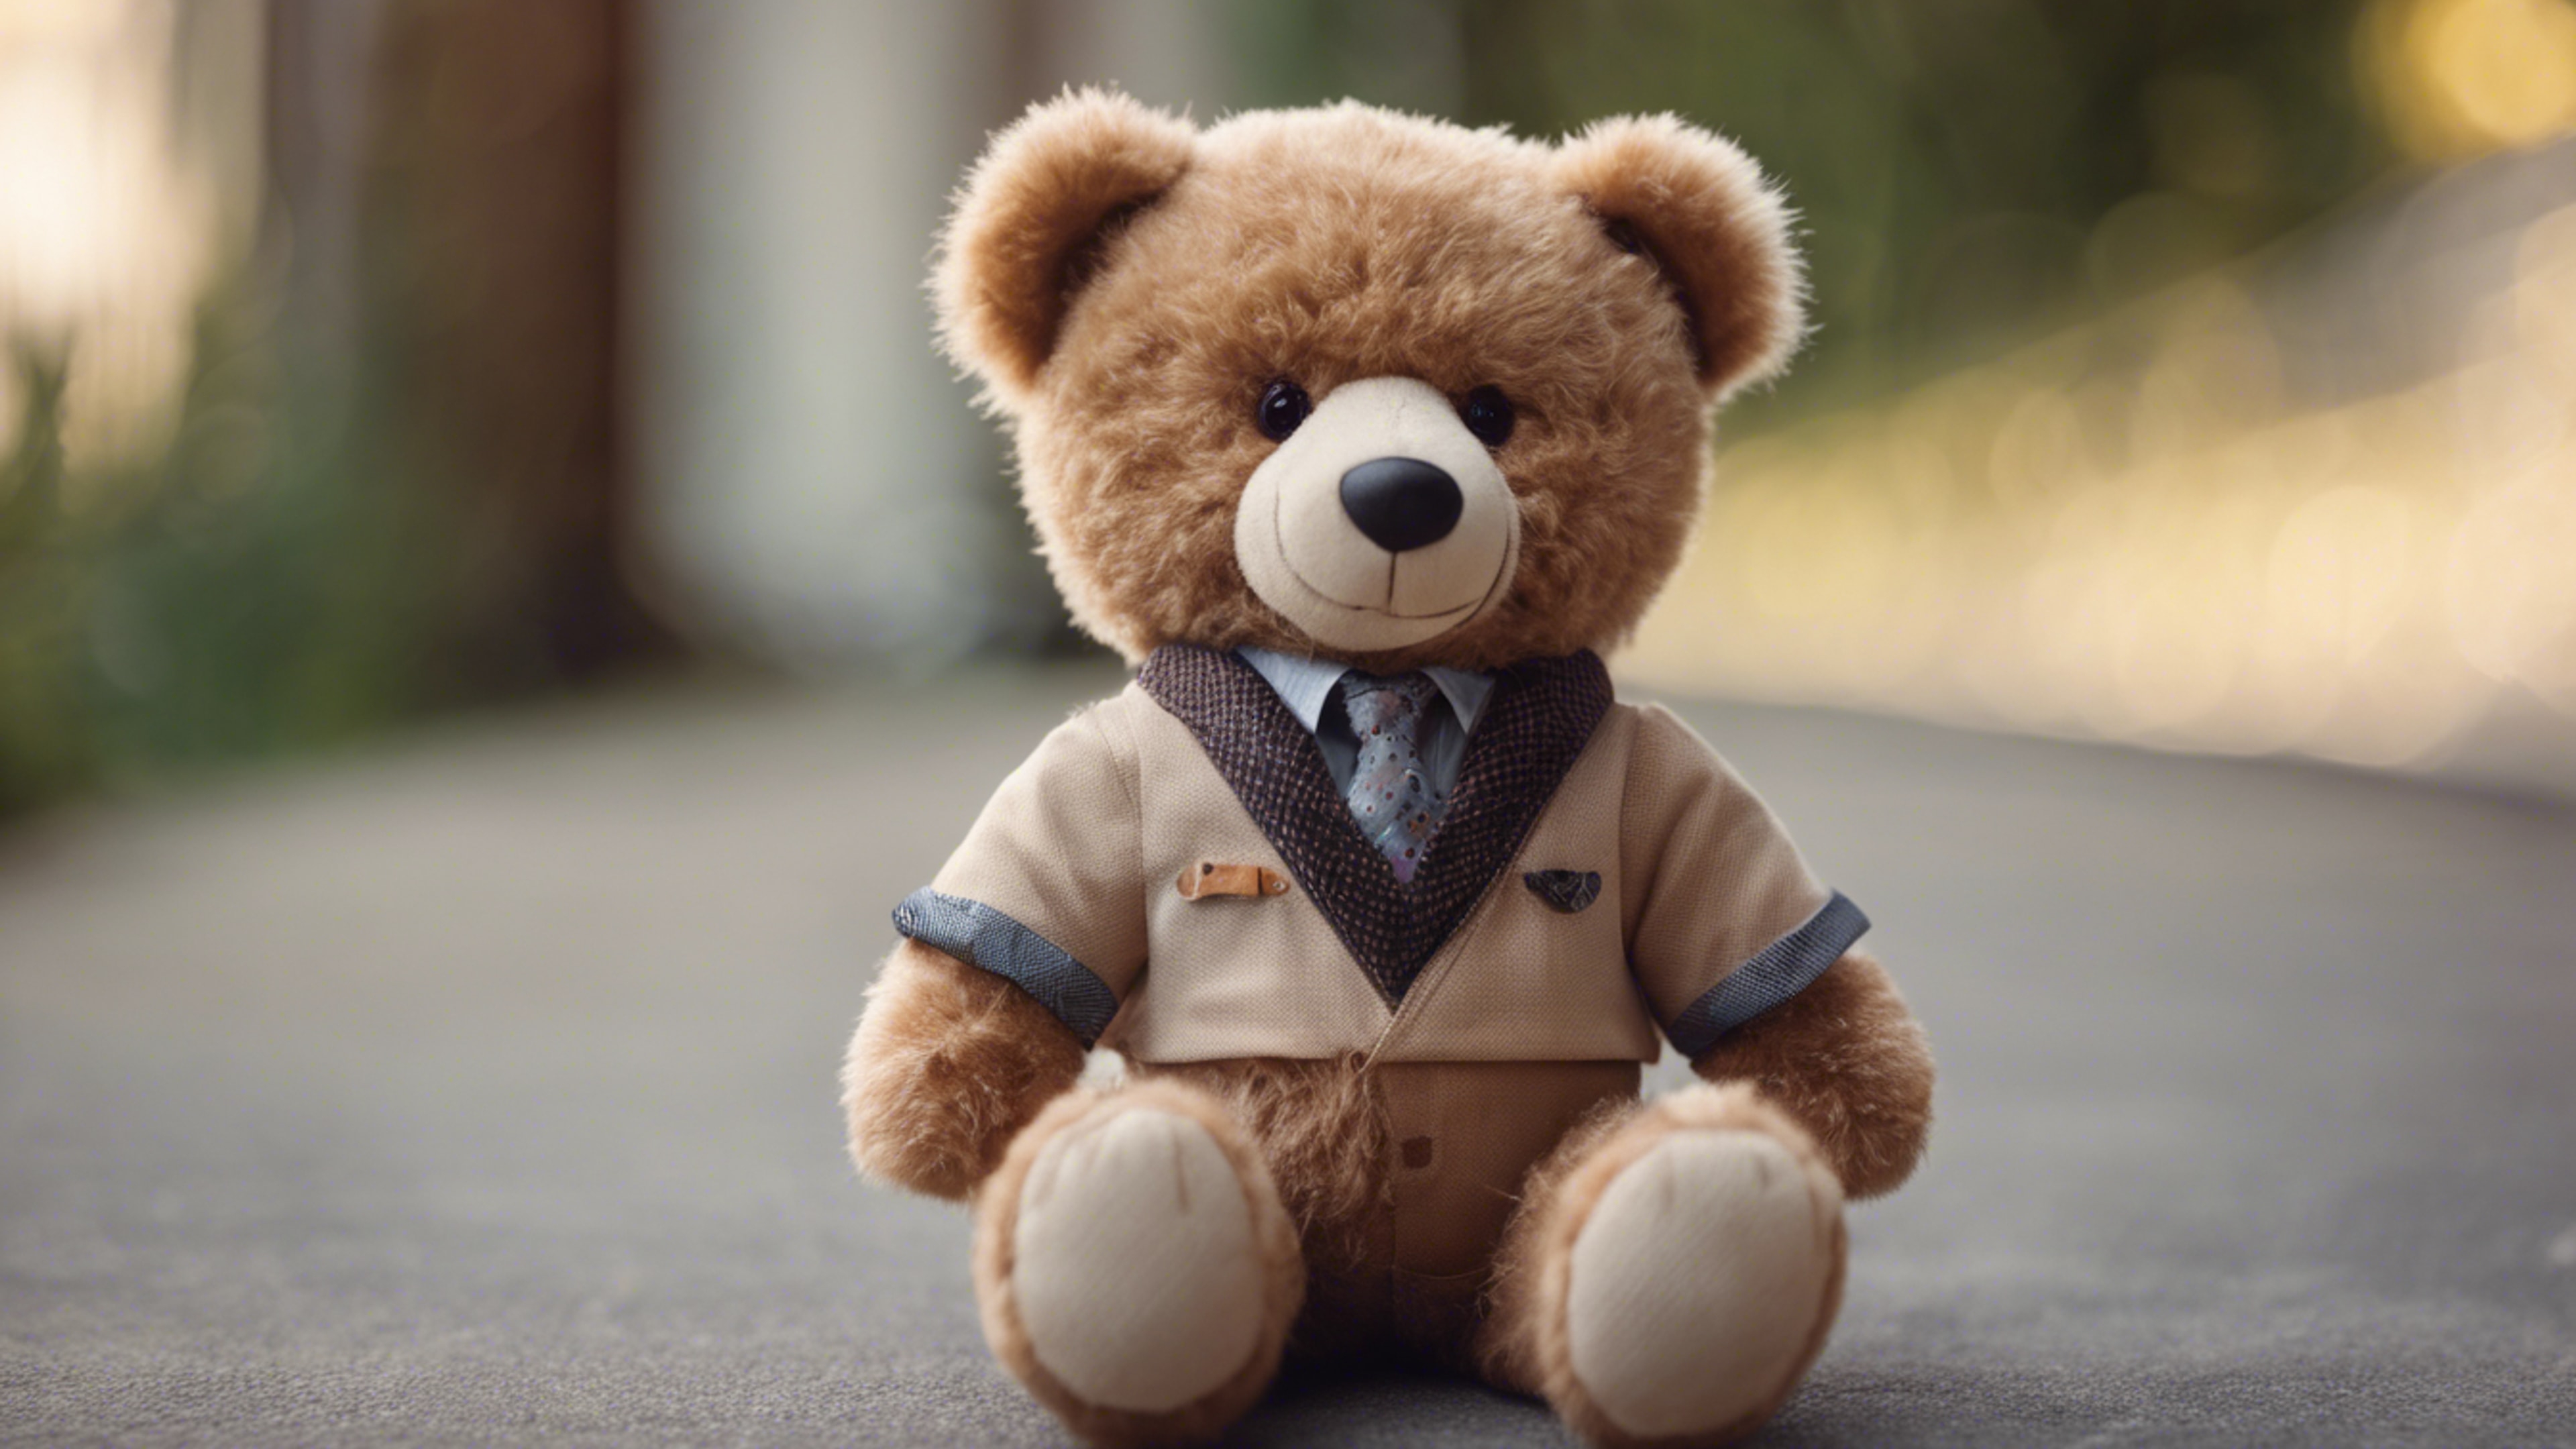 A teddy bear with light brown fur wearing a preppy outfit. Tapeta[c4dfc3c378844a52a1e6]